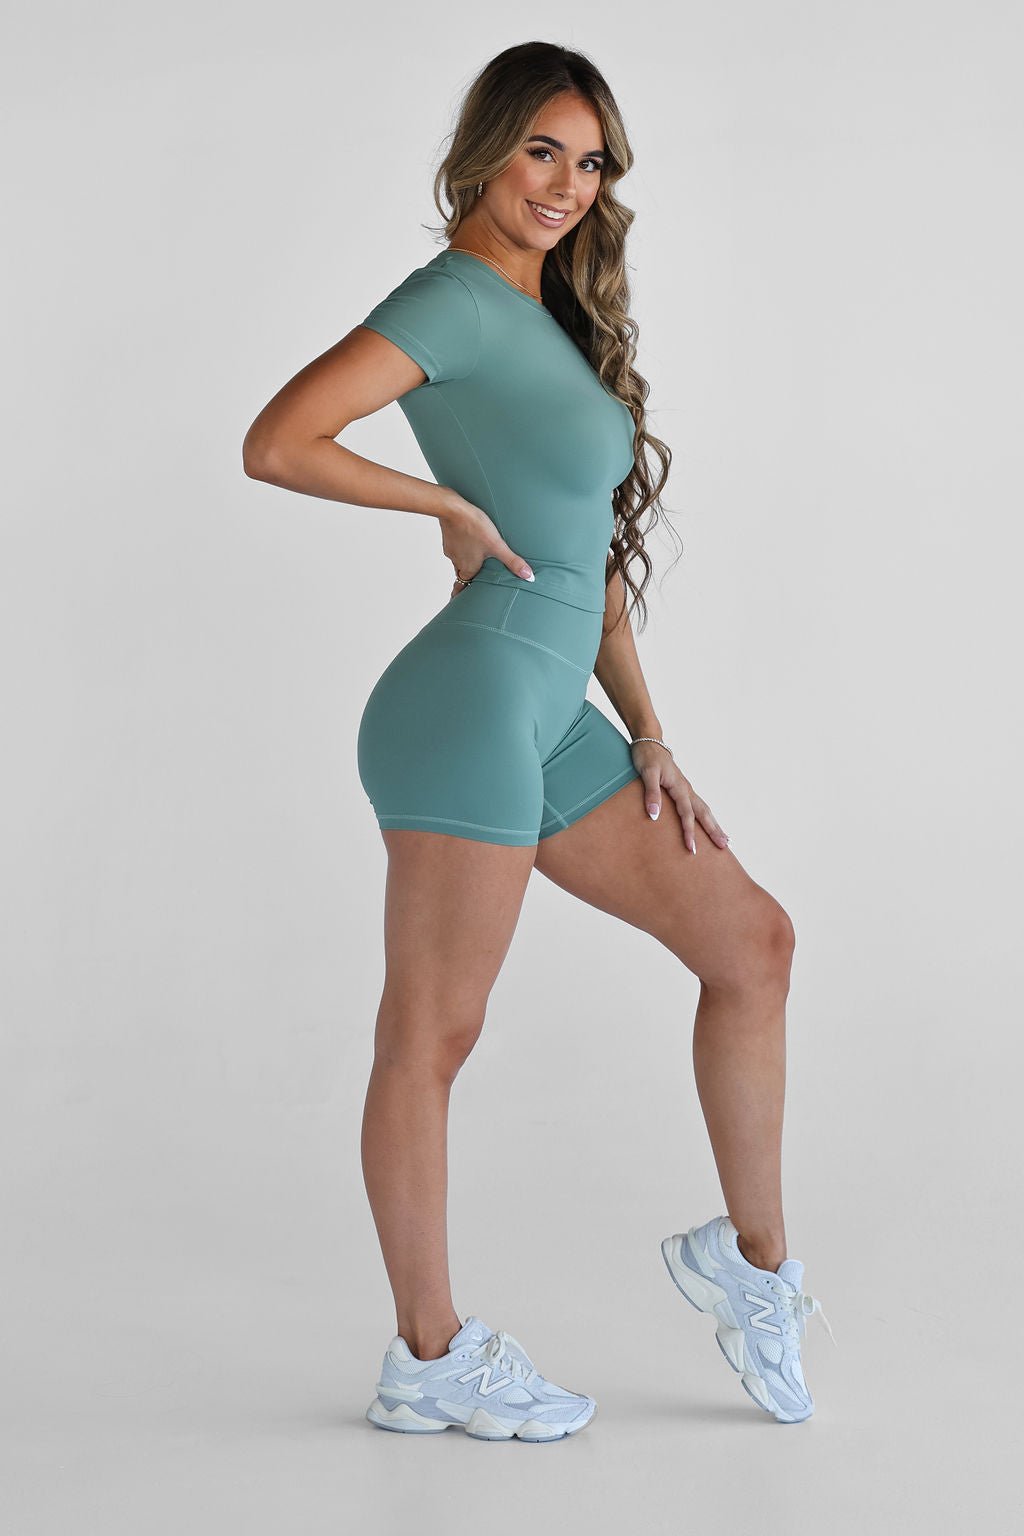 SCULPT Fitted Tee - Sage SHIPPING FROM 3/11 - LEELO ACTIVE